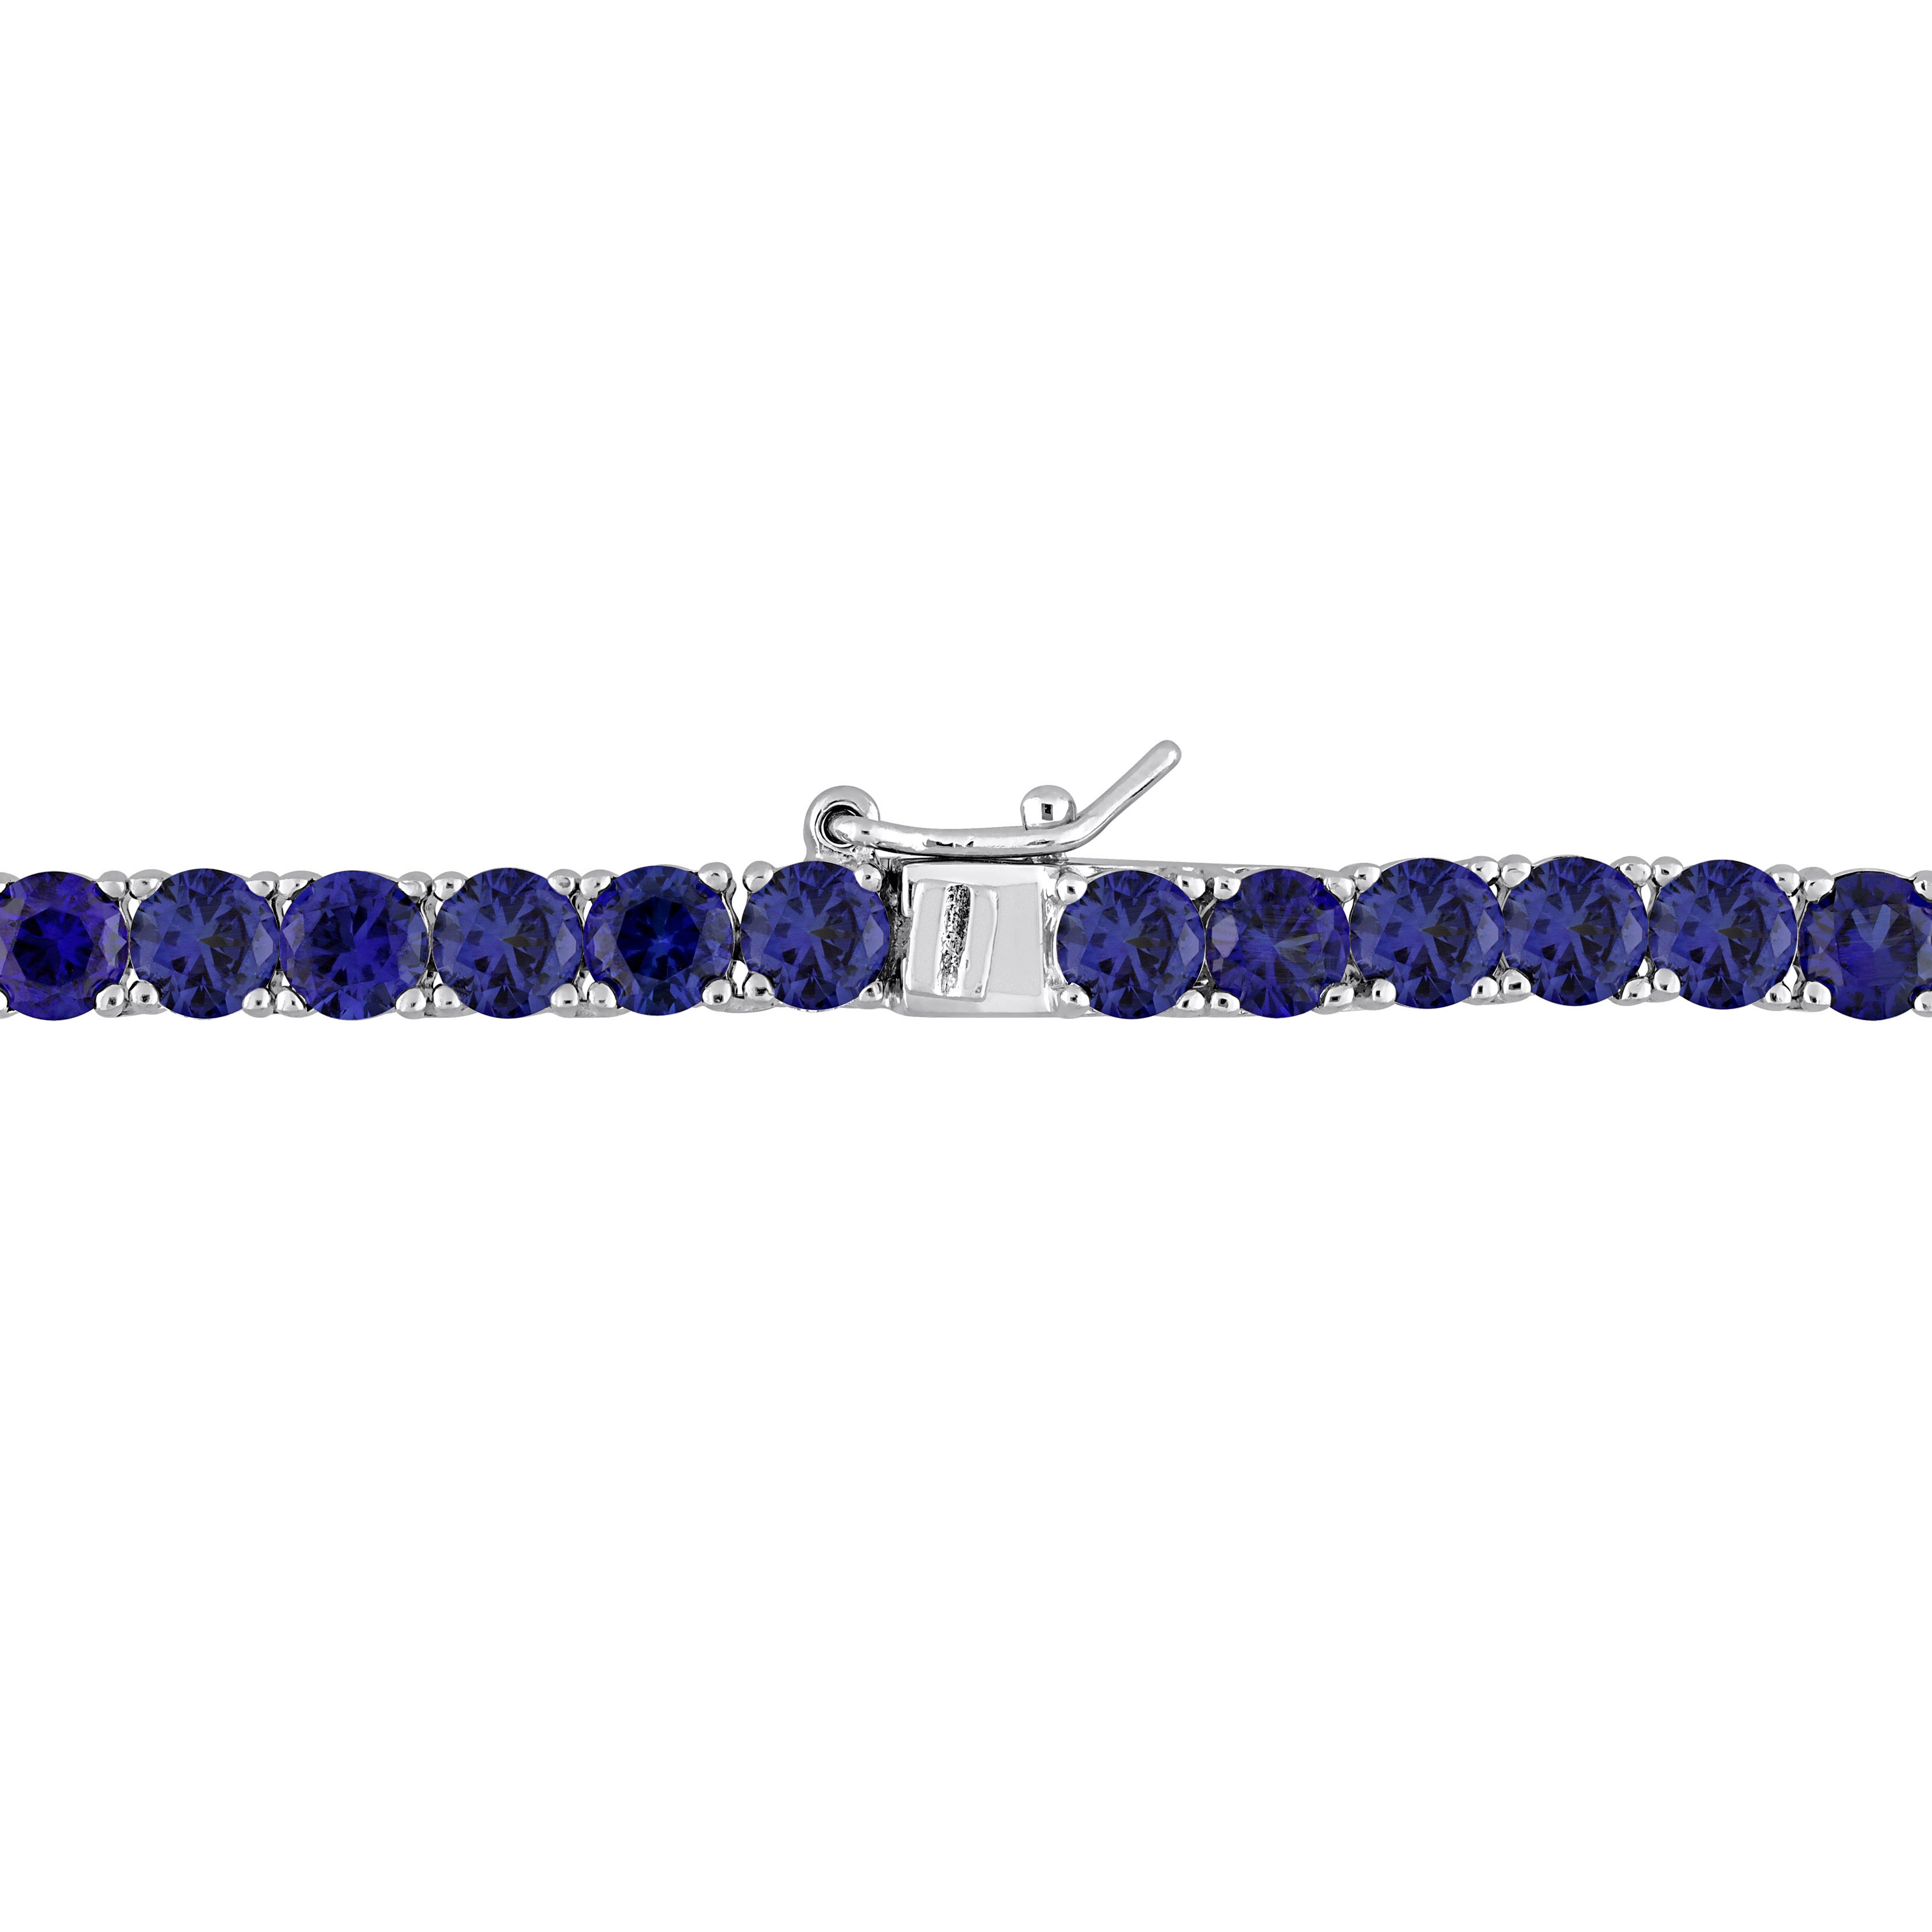 33 CT TGW Created Blue Sapphire Tennis Necklace in Sterling Silver - 17 in.